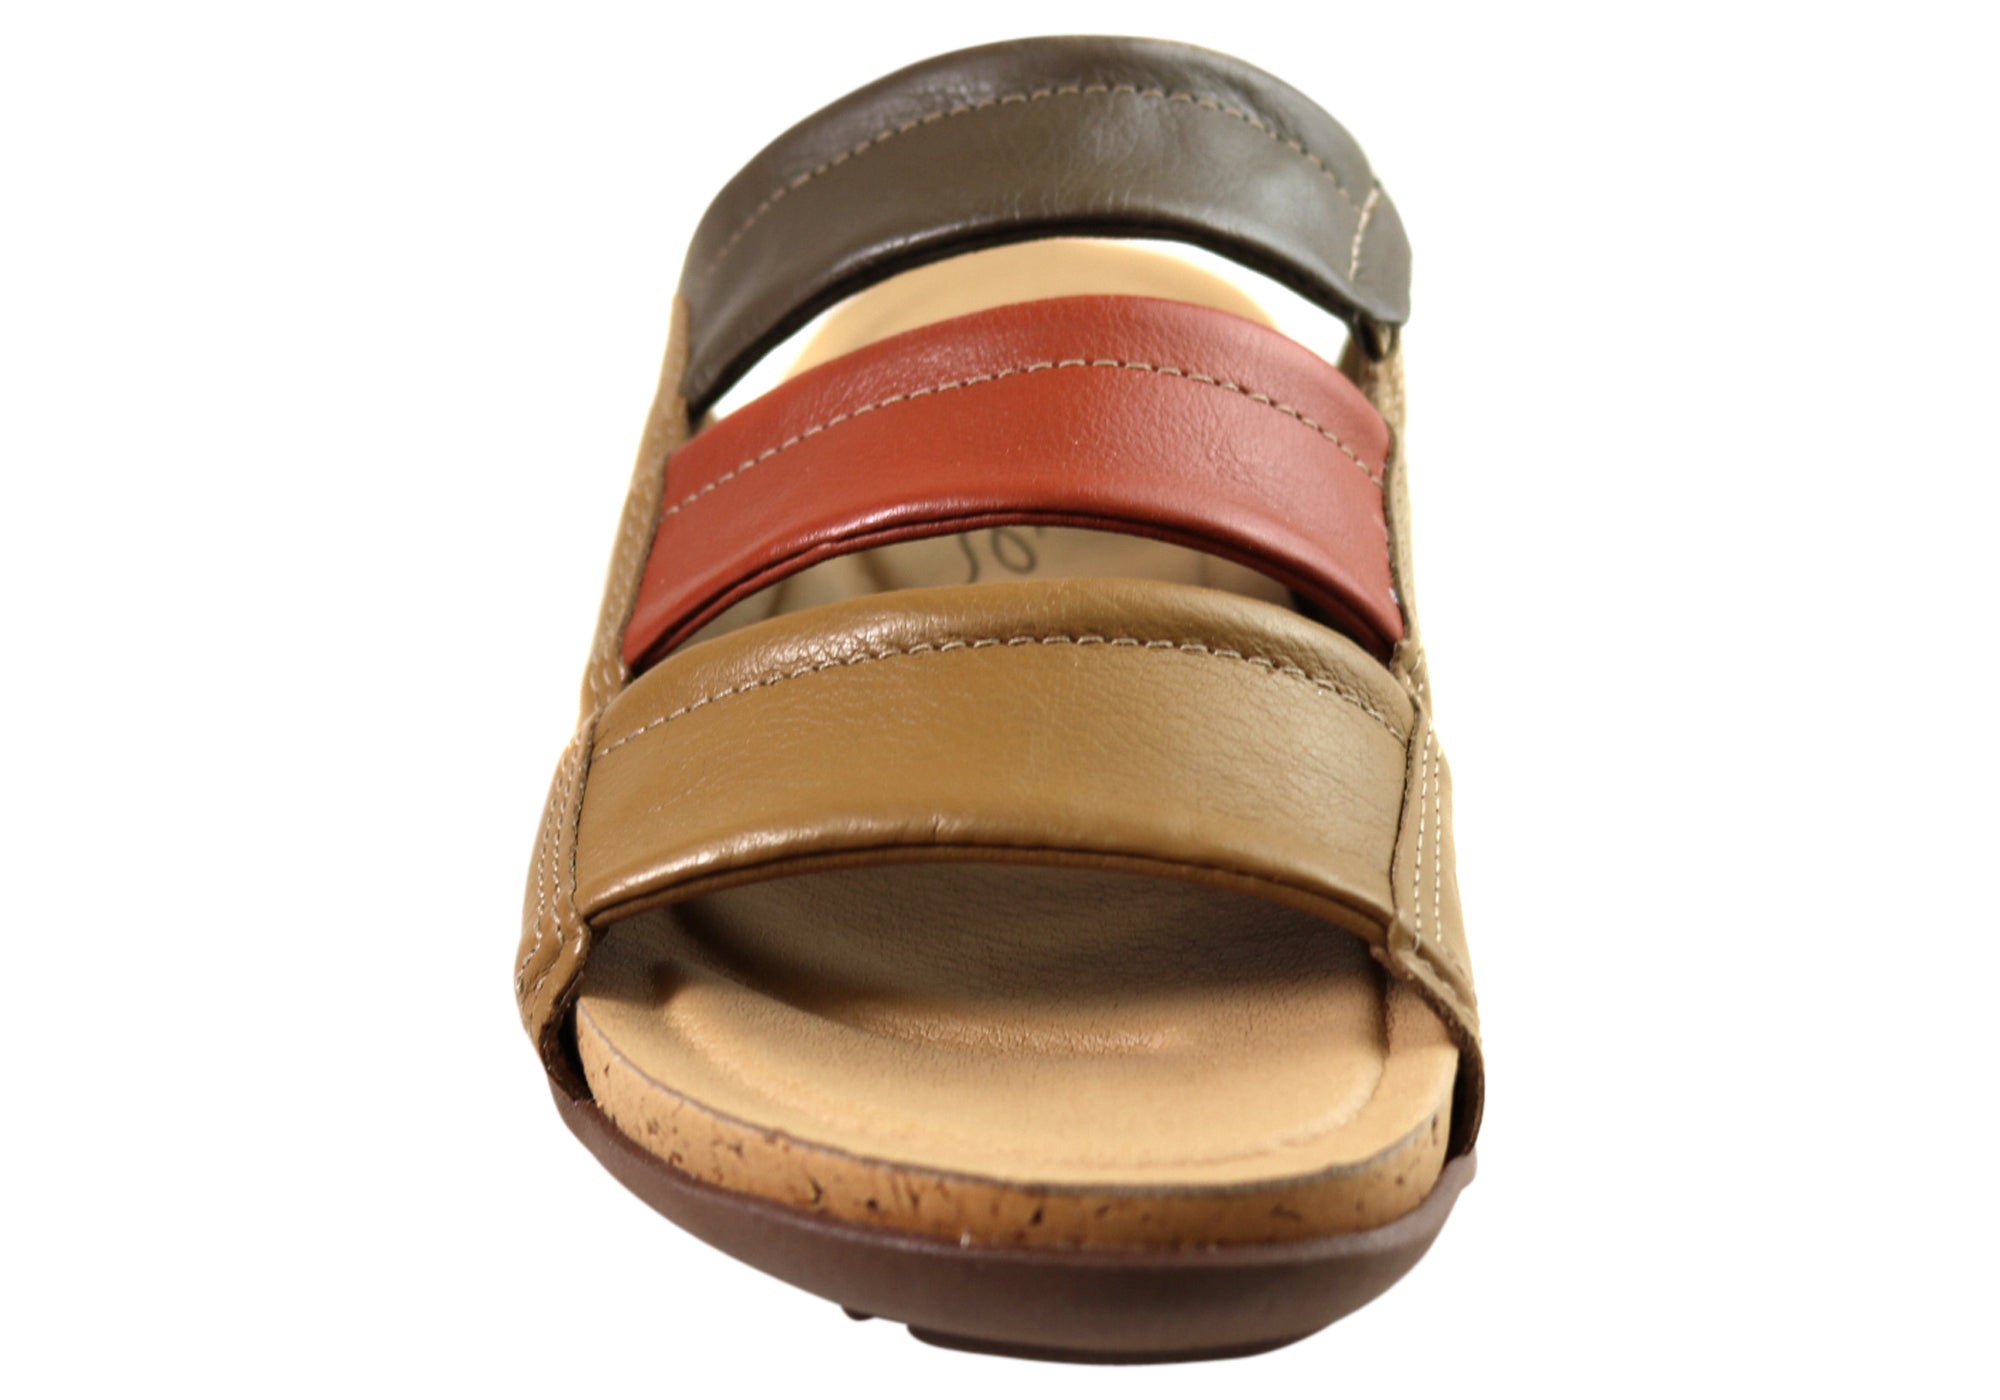 New Face Serenity Womens Comfort Leather Slides Sandals Made In Brazil